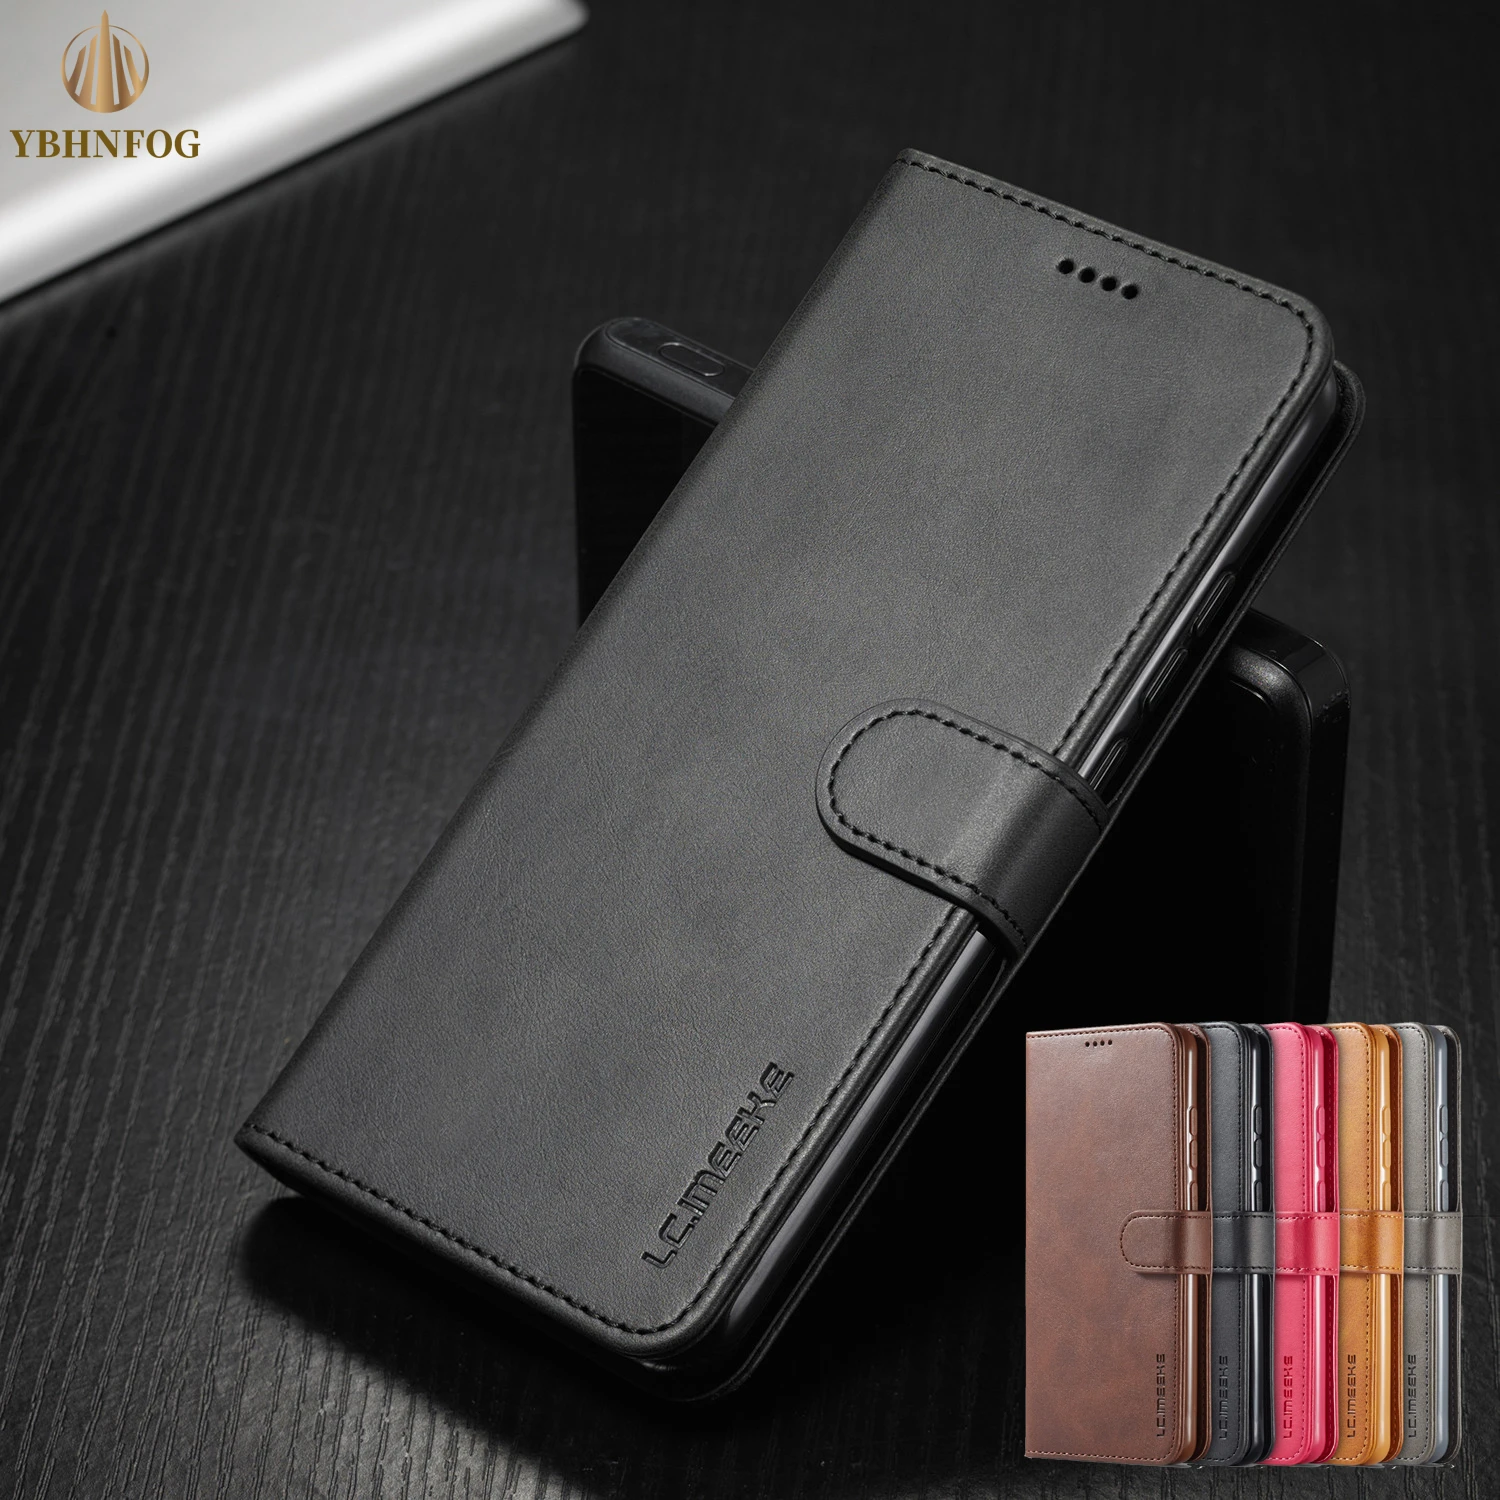 iphone 13 pro max cover Luxury Wallet Case For Apple iPhone 13 12 Mini 11 Pro Max XR XS 6 6S 7+ 8 Plus 5 5S SE 2020 Leather Flip Stand Cover Phone Coque iphone 13 pro max cover